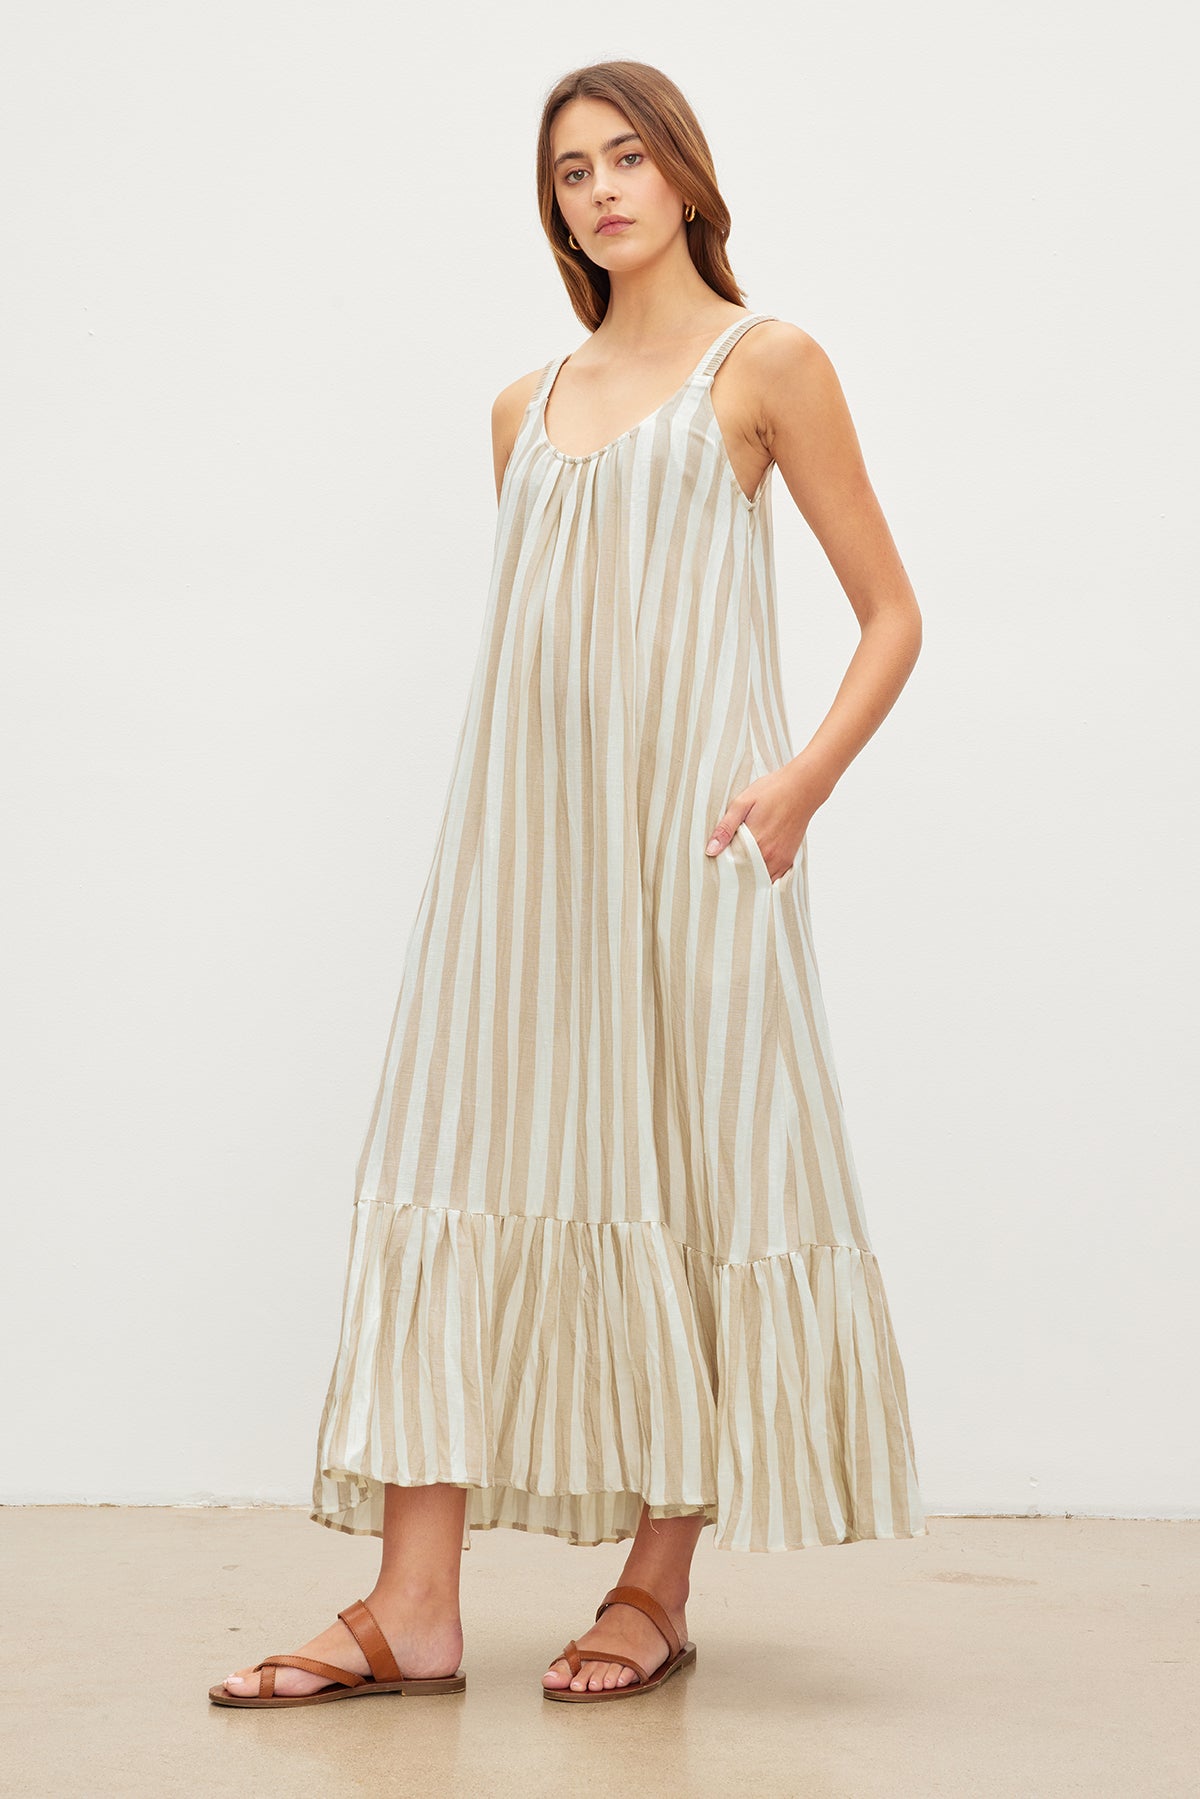 A woman in a MERADITH STRIPED LINEN MAXI DRESS by Velvet by Graham & Spencer and brown sandals standing in a neutral-toned studio.-35982309621953